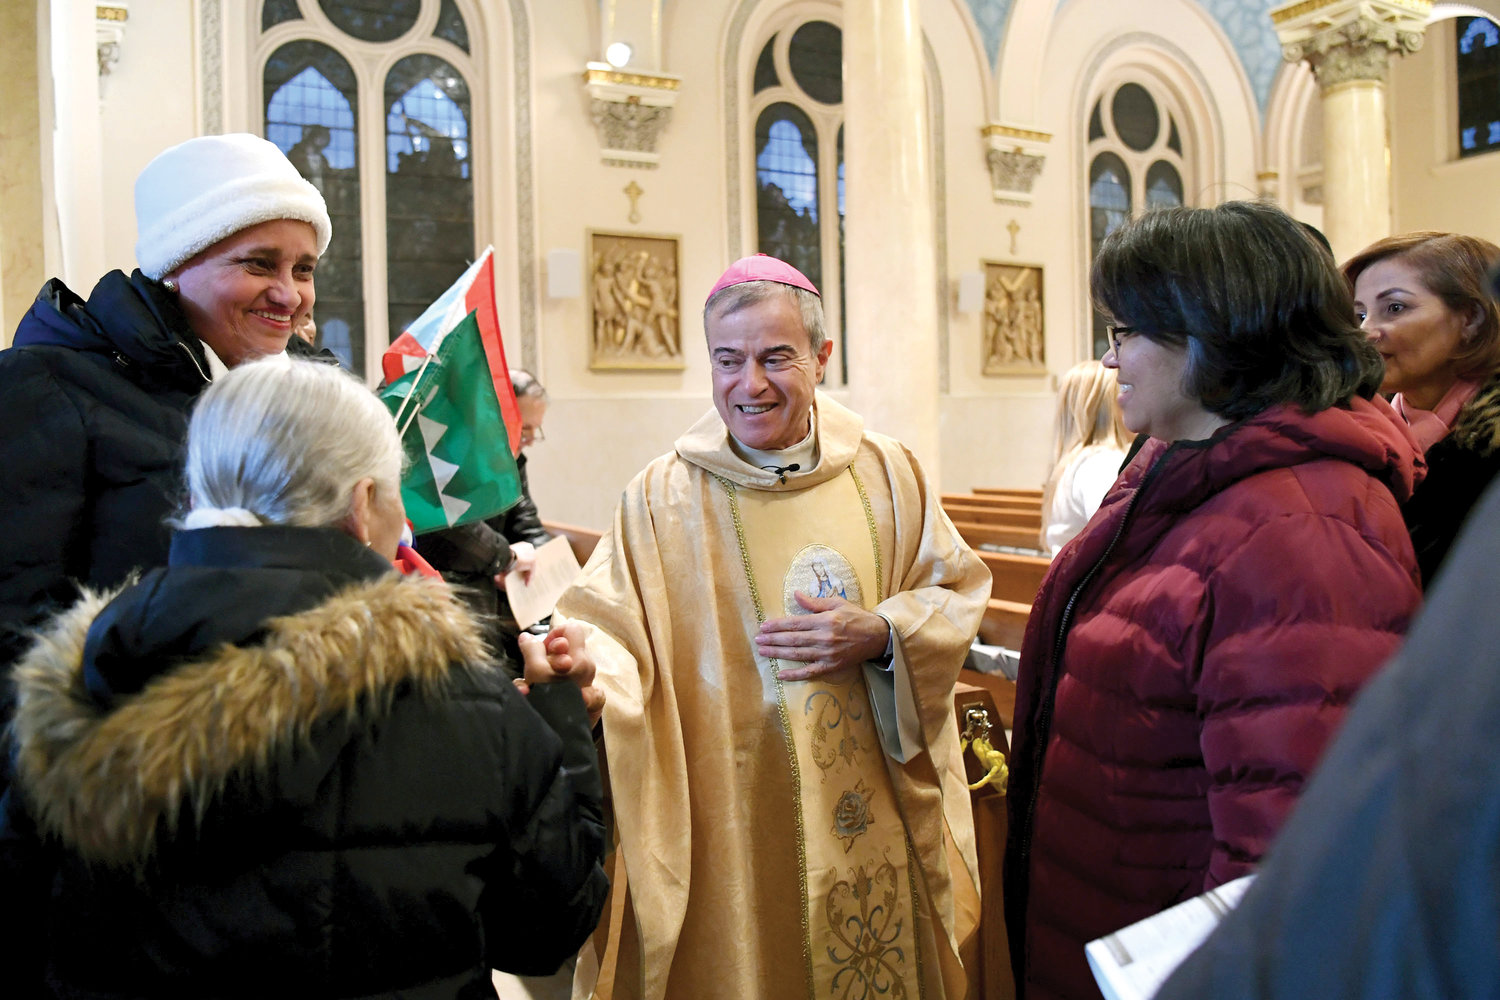 Archbishop Gonzalez warmly greets those who attended the Mass.